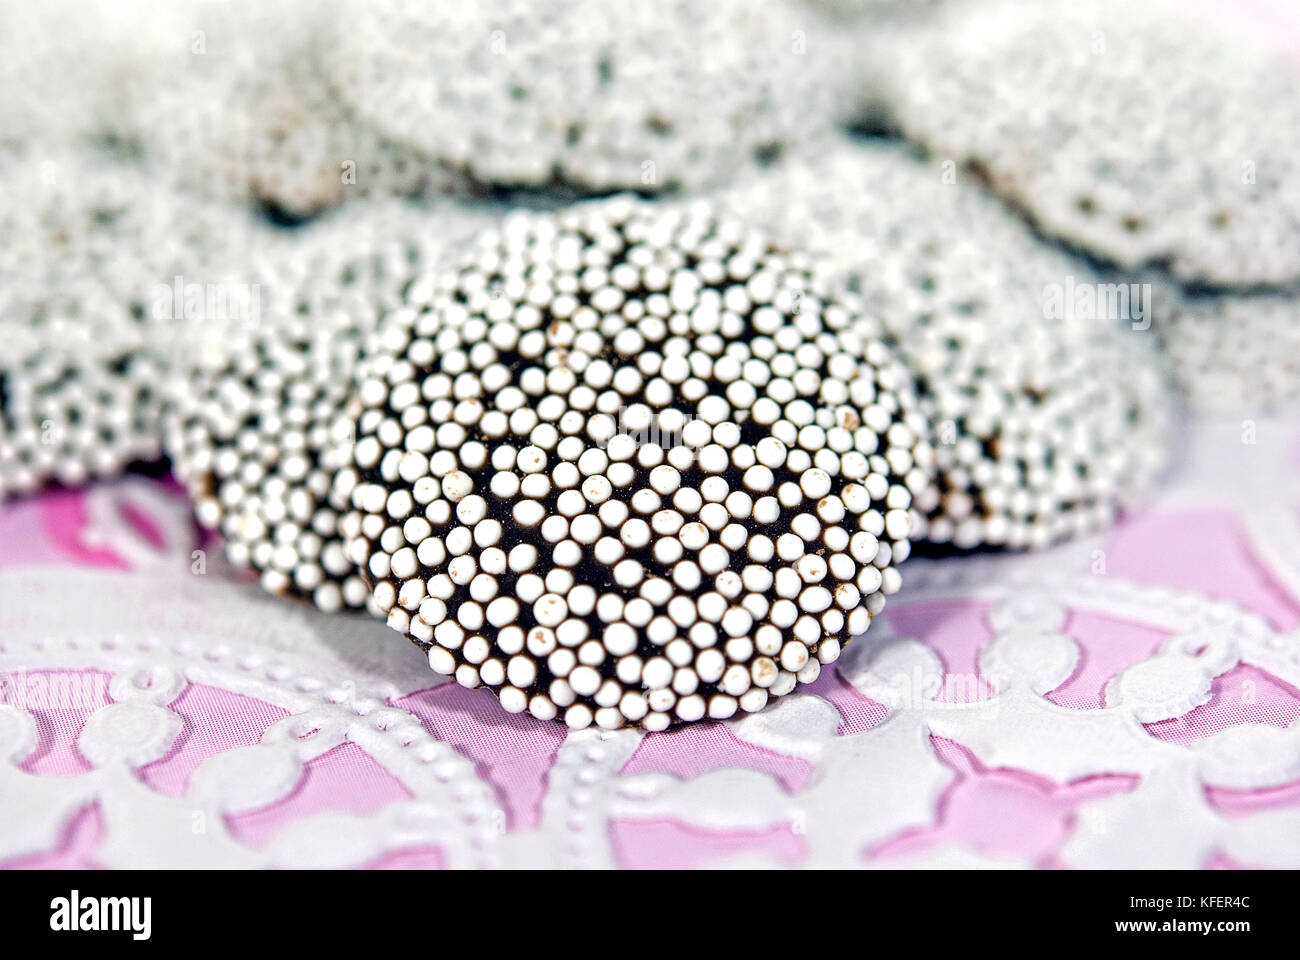 close up of nonpareil candy on paper lace doily Stock Photo